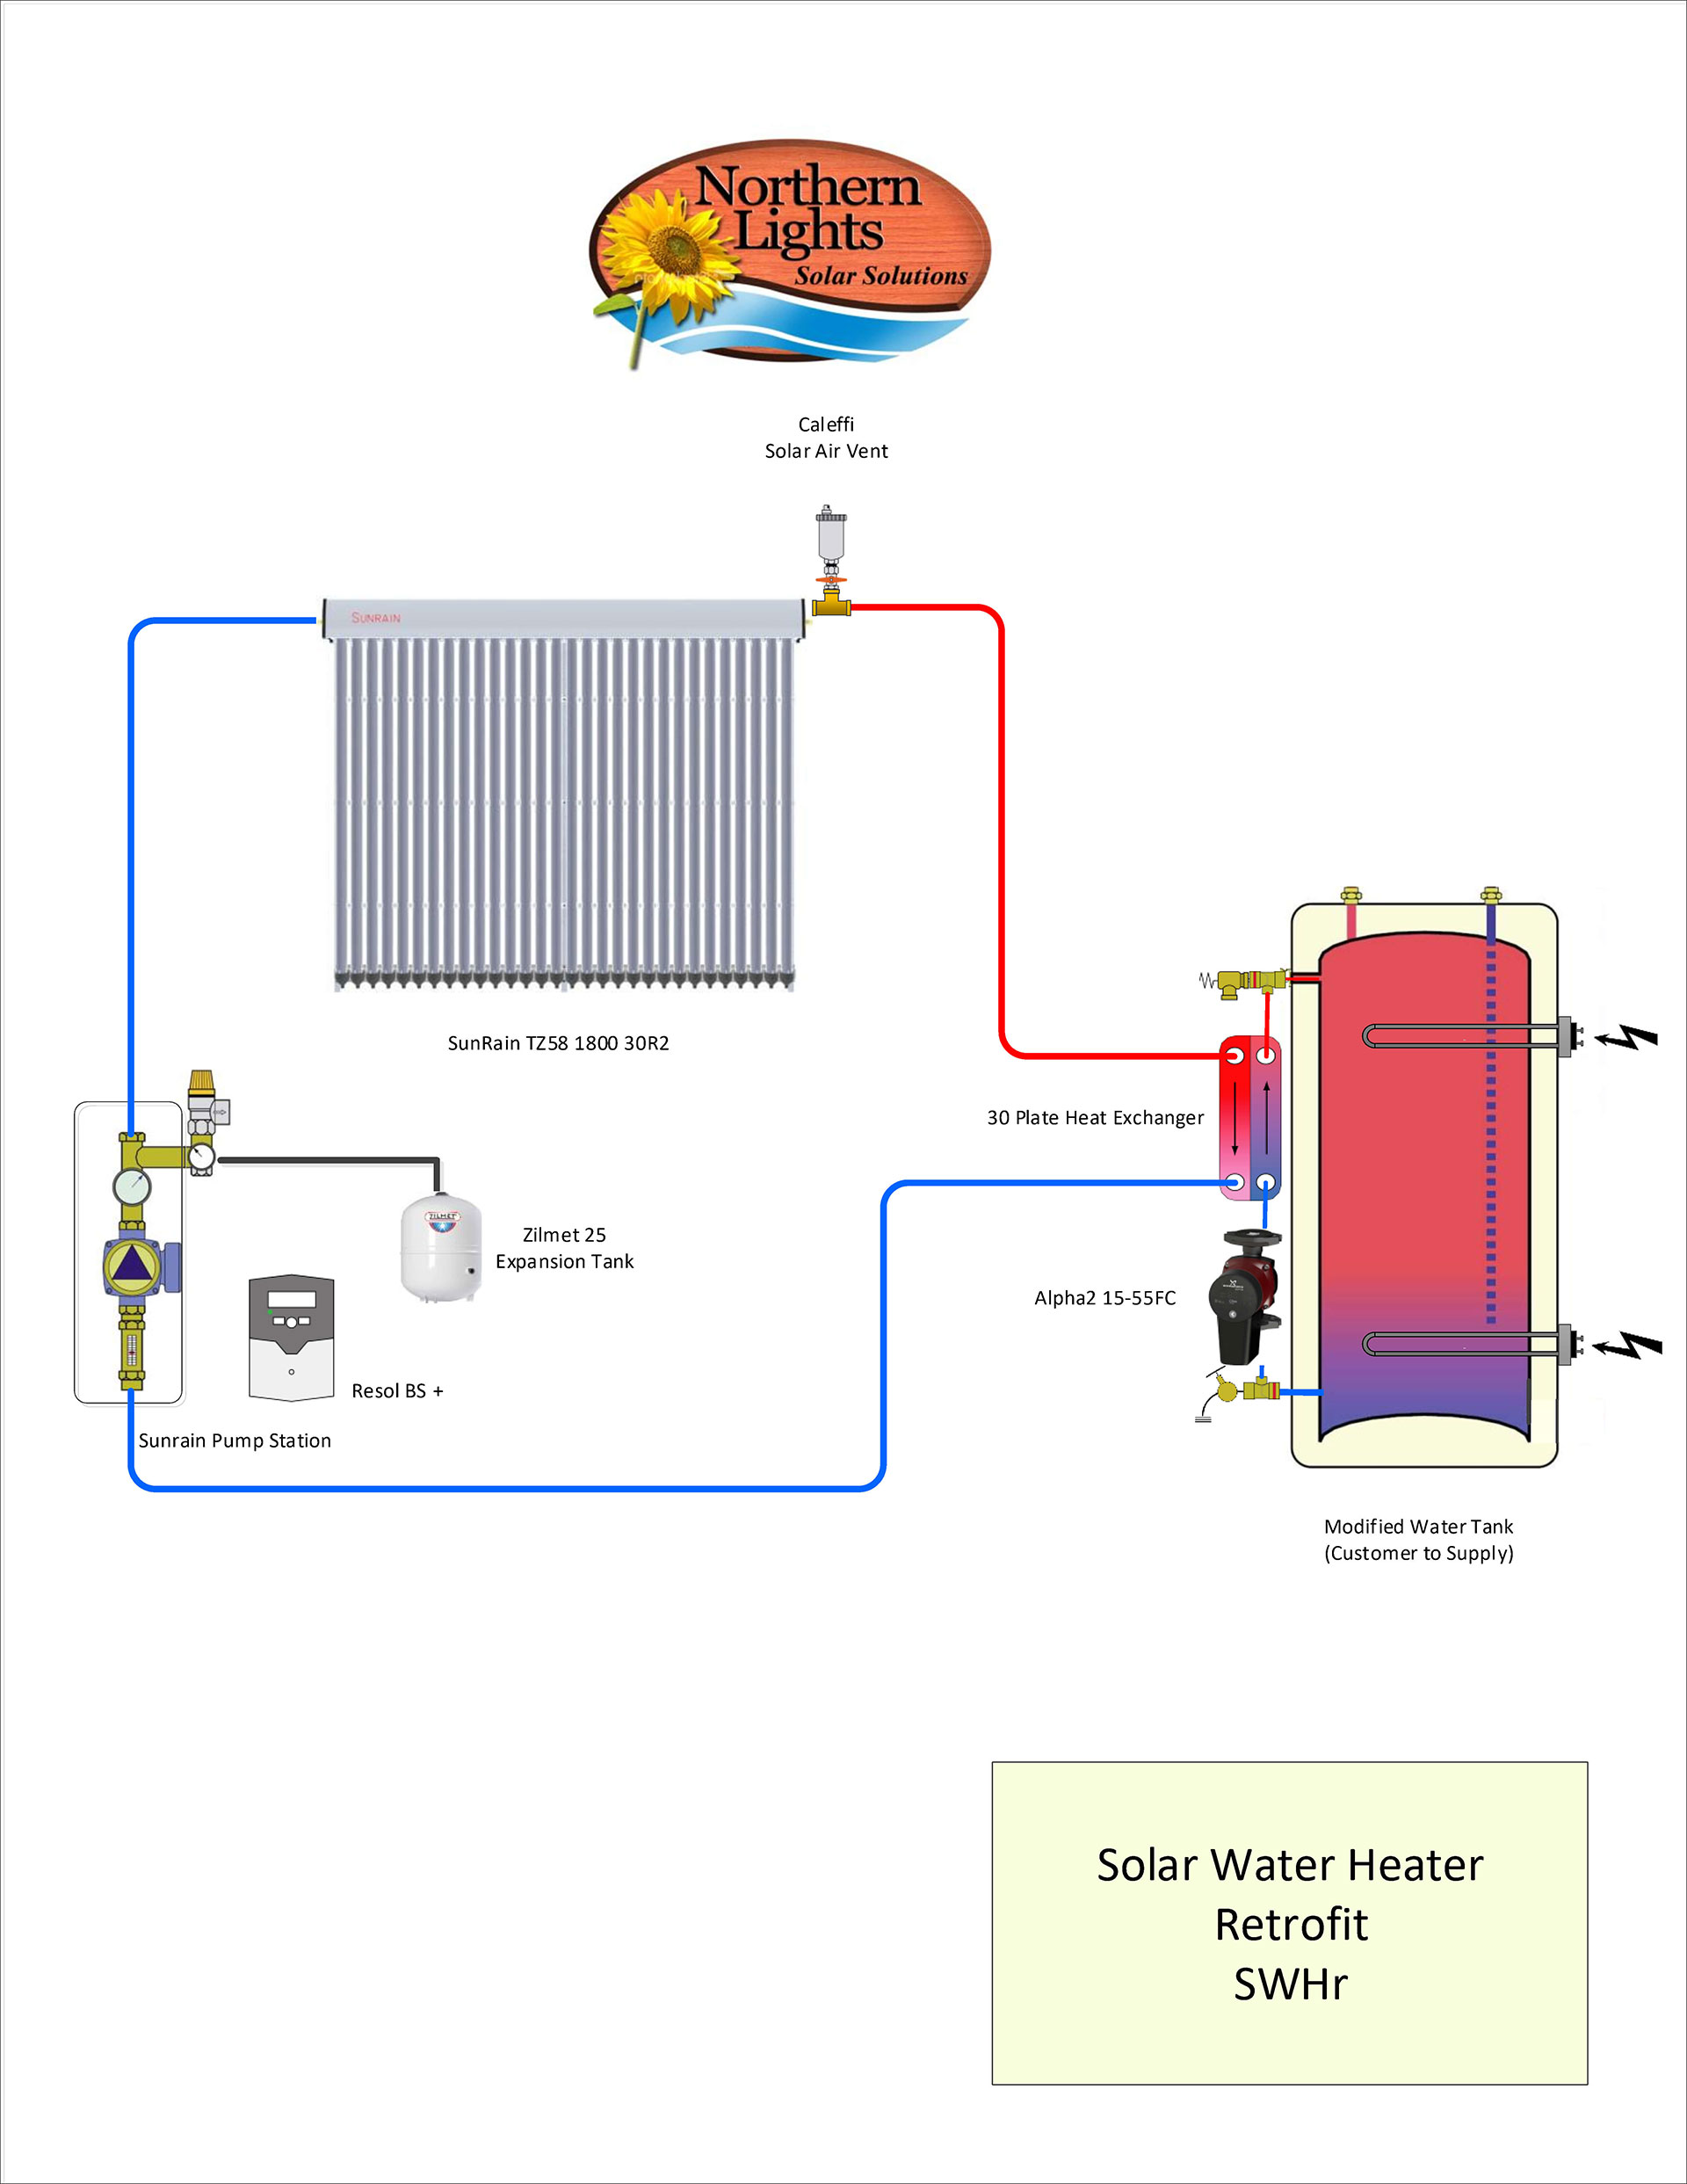 solar water heater with 2 evacuated tube collectors